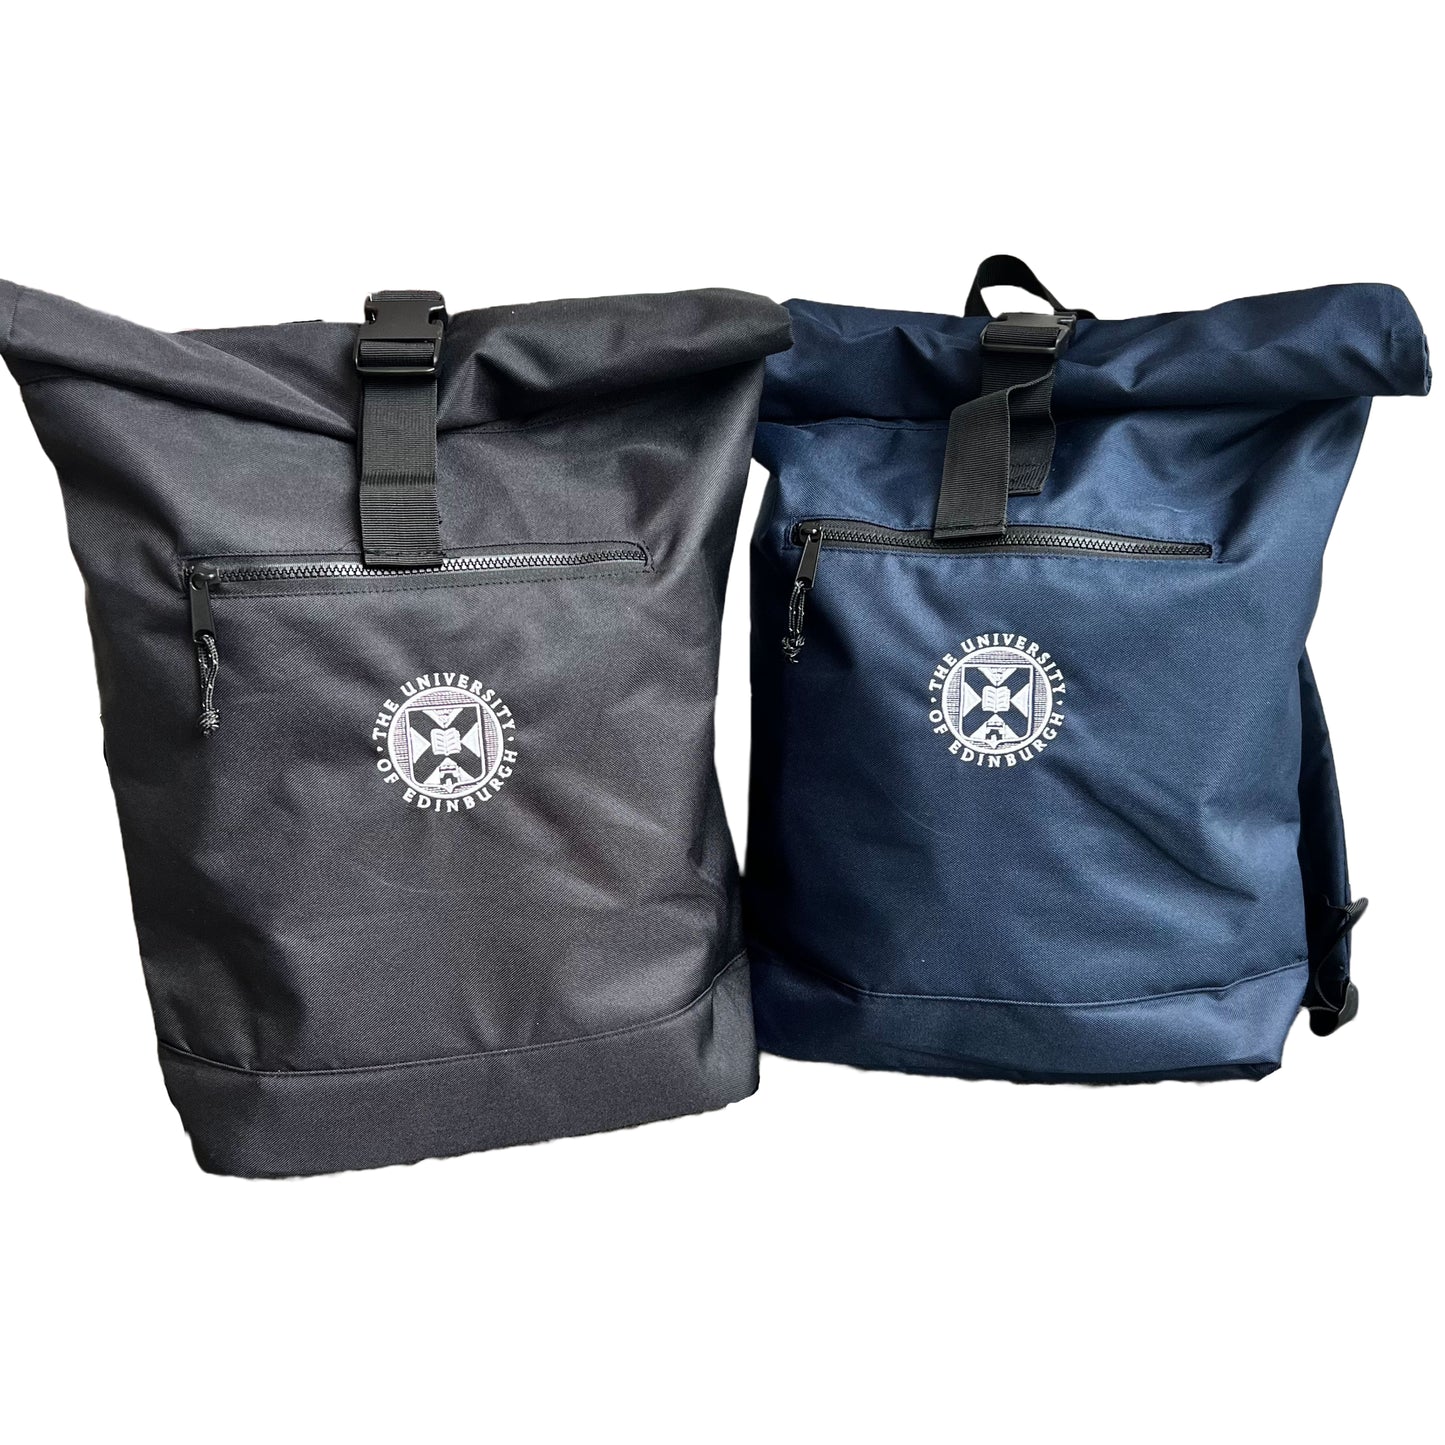 Two roll-top backpacks with University of Edinburgh crest stitched on the centre in white. One backpack is navy and the other backpack is black. The backpacks have a zipped pocket at the front.